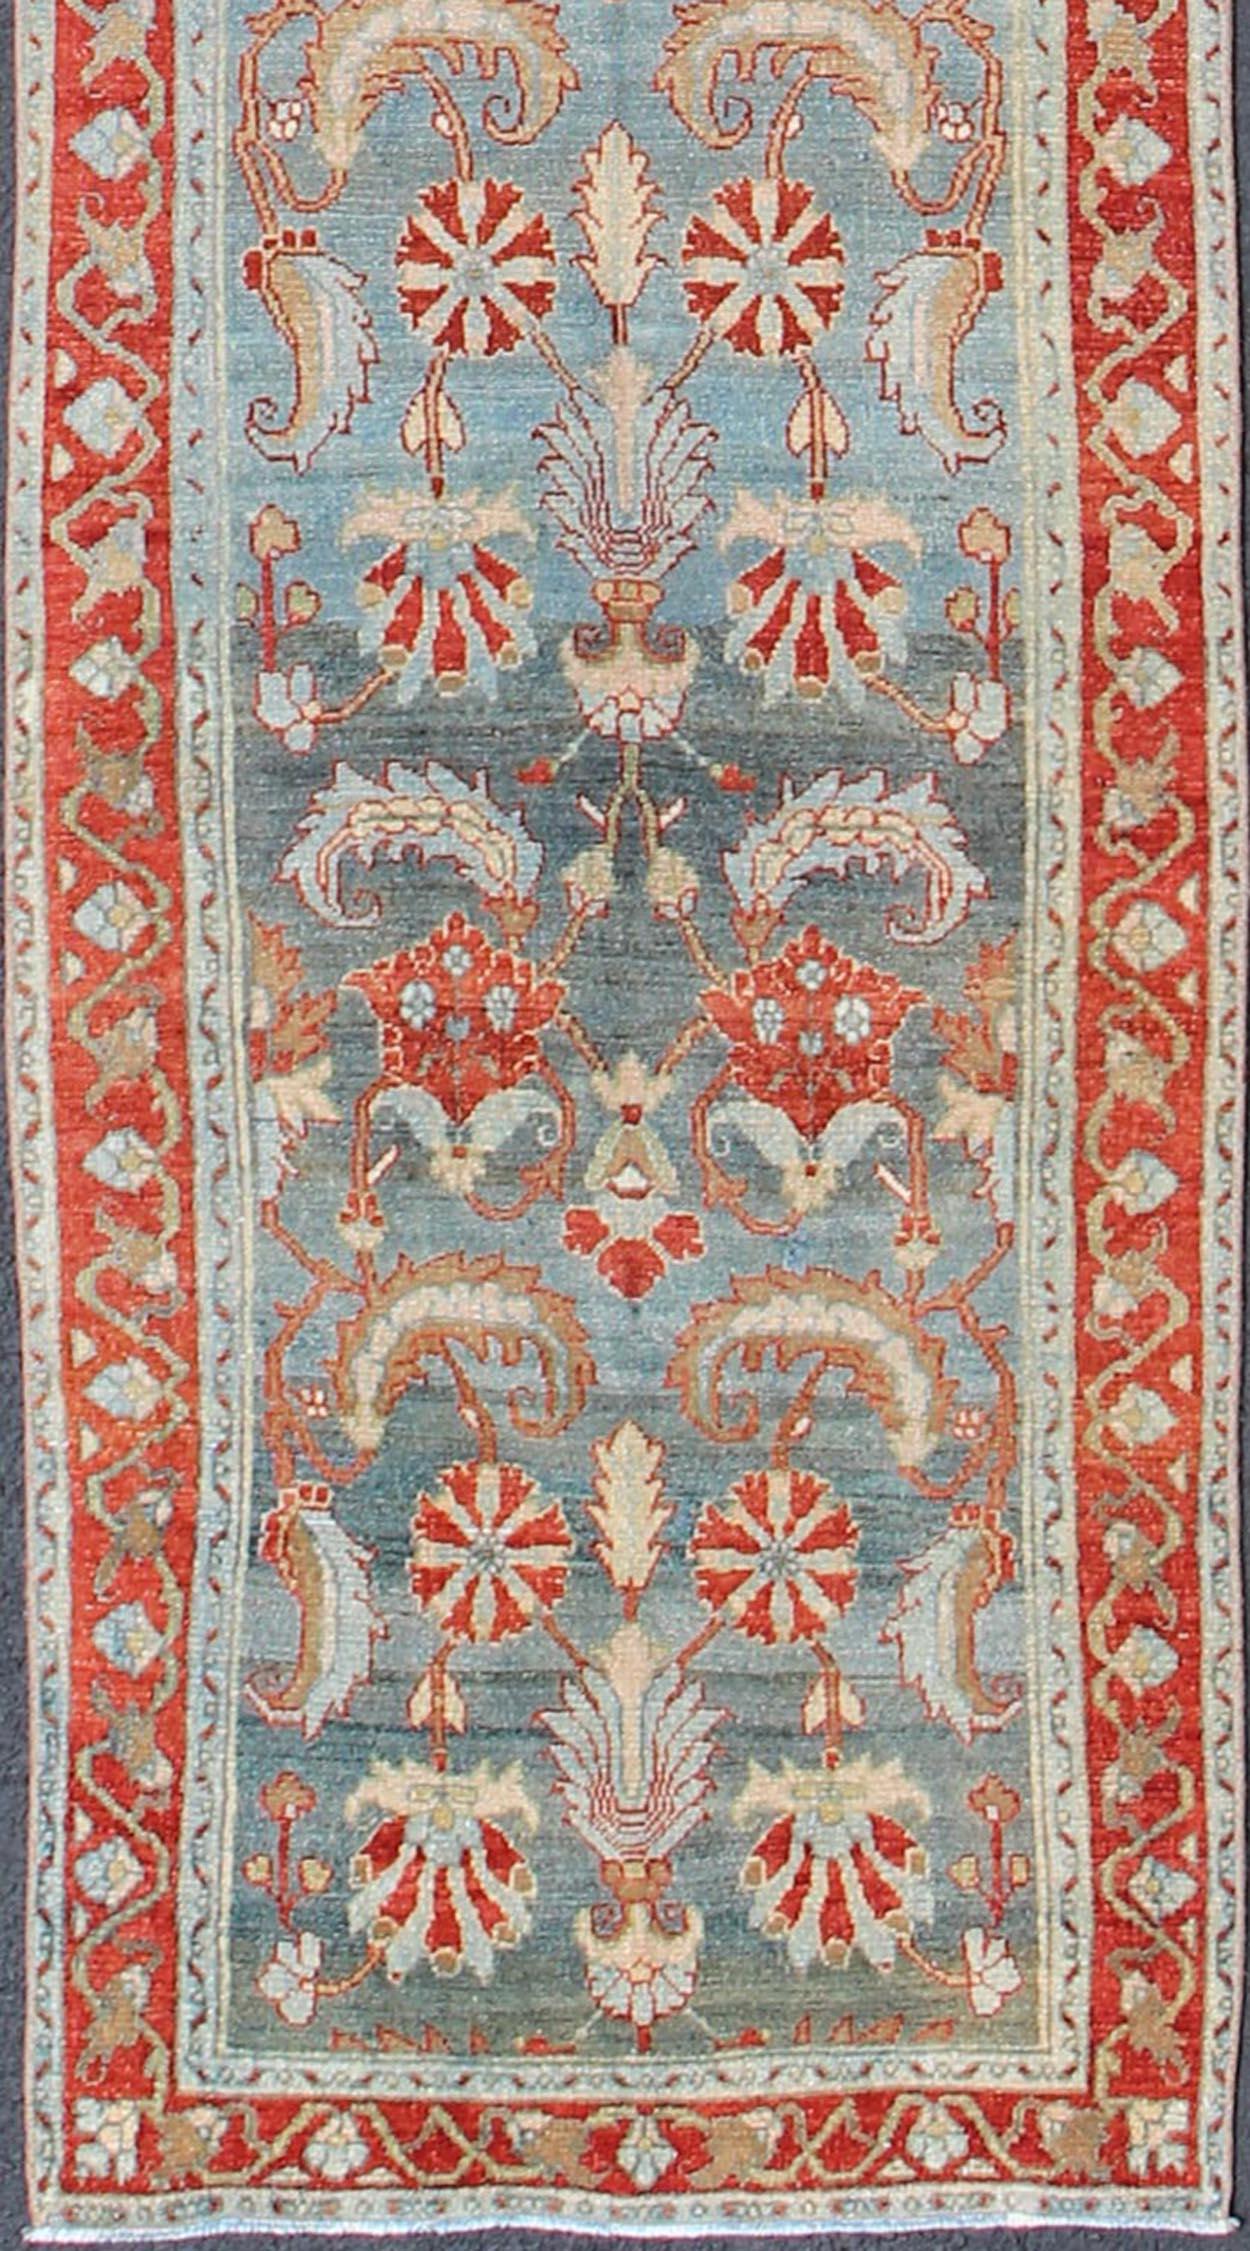 Hamedan Persian antique runner with blue and red geometric motifs, rug sus-1807-227, country of origin / type: Iran / Hamedan, circa 1920

This antique Persian Hamedan gallery rug (circa early 20th century) features a unique blend of colors and an